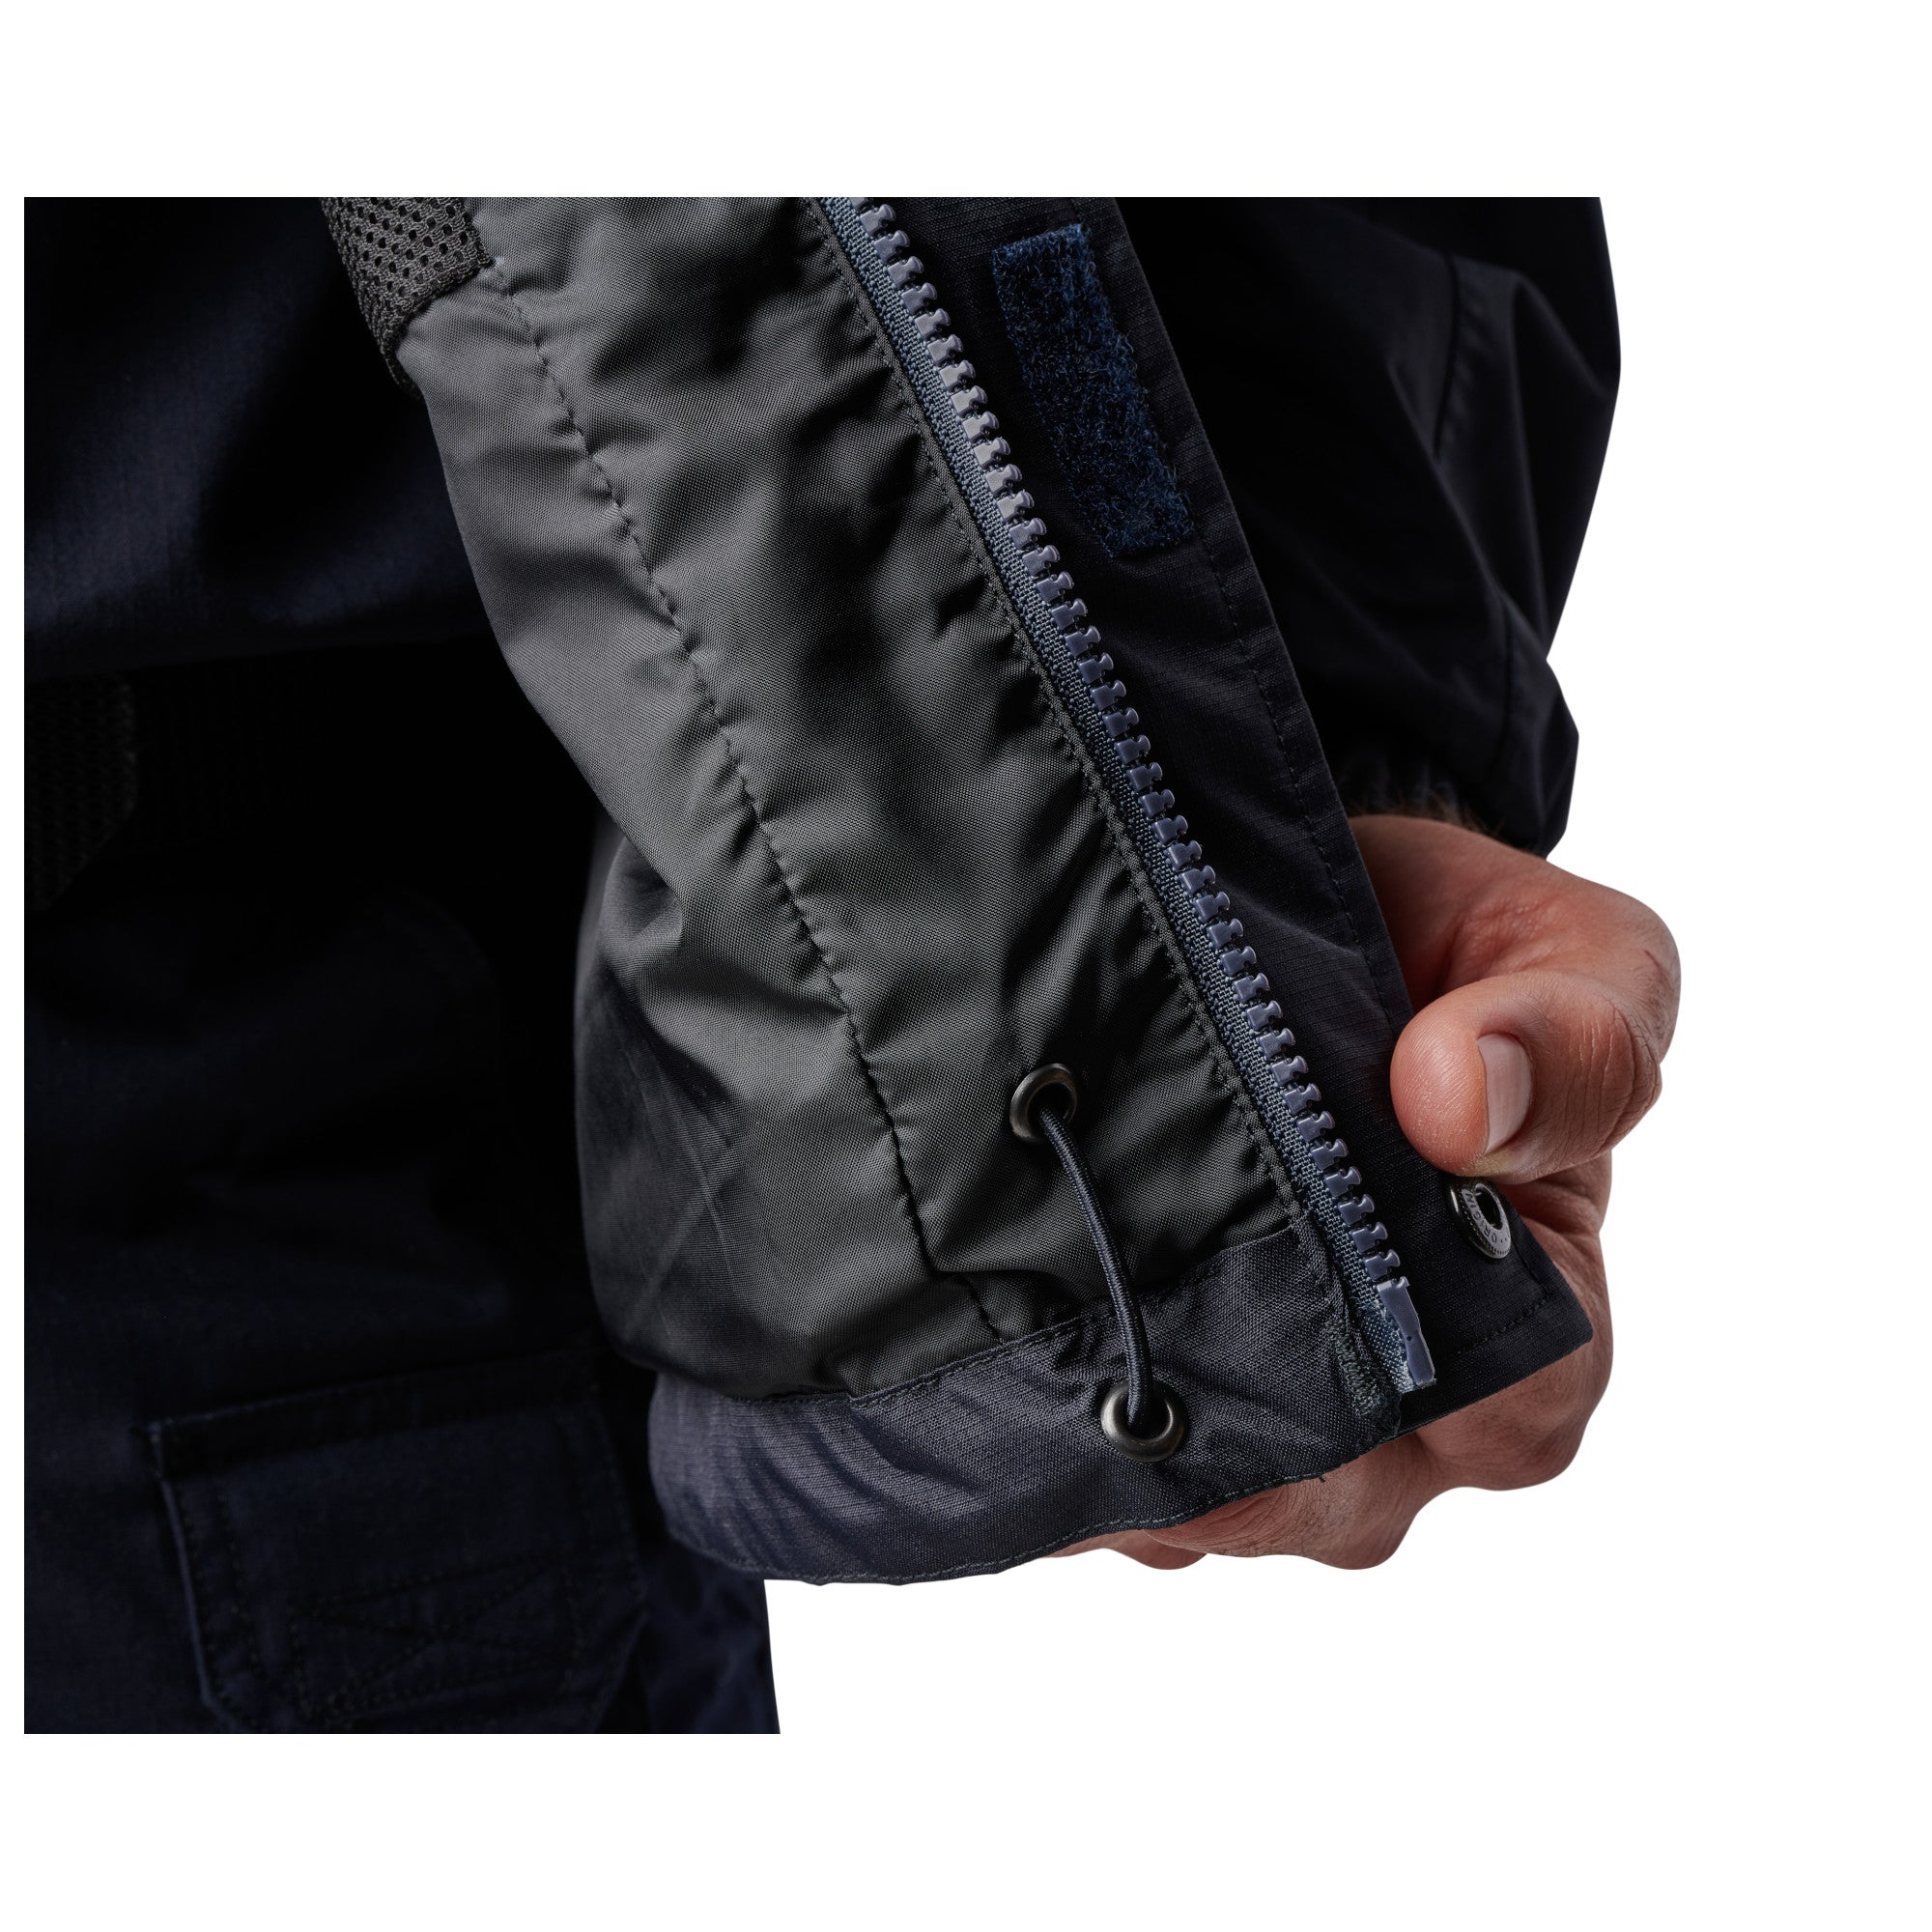 5.11 Tactical Tac-Dry Rain Shell 2.0 Outerwear 5.11 Tactical Tactical Gear Supplier Tactical Distributors Australia